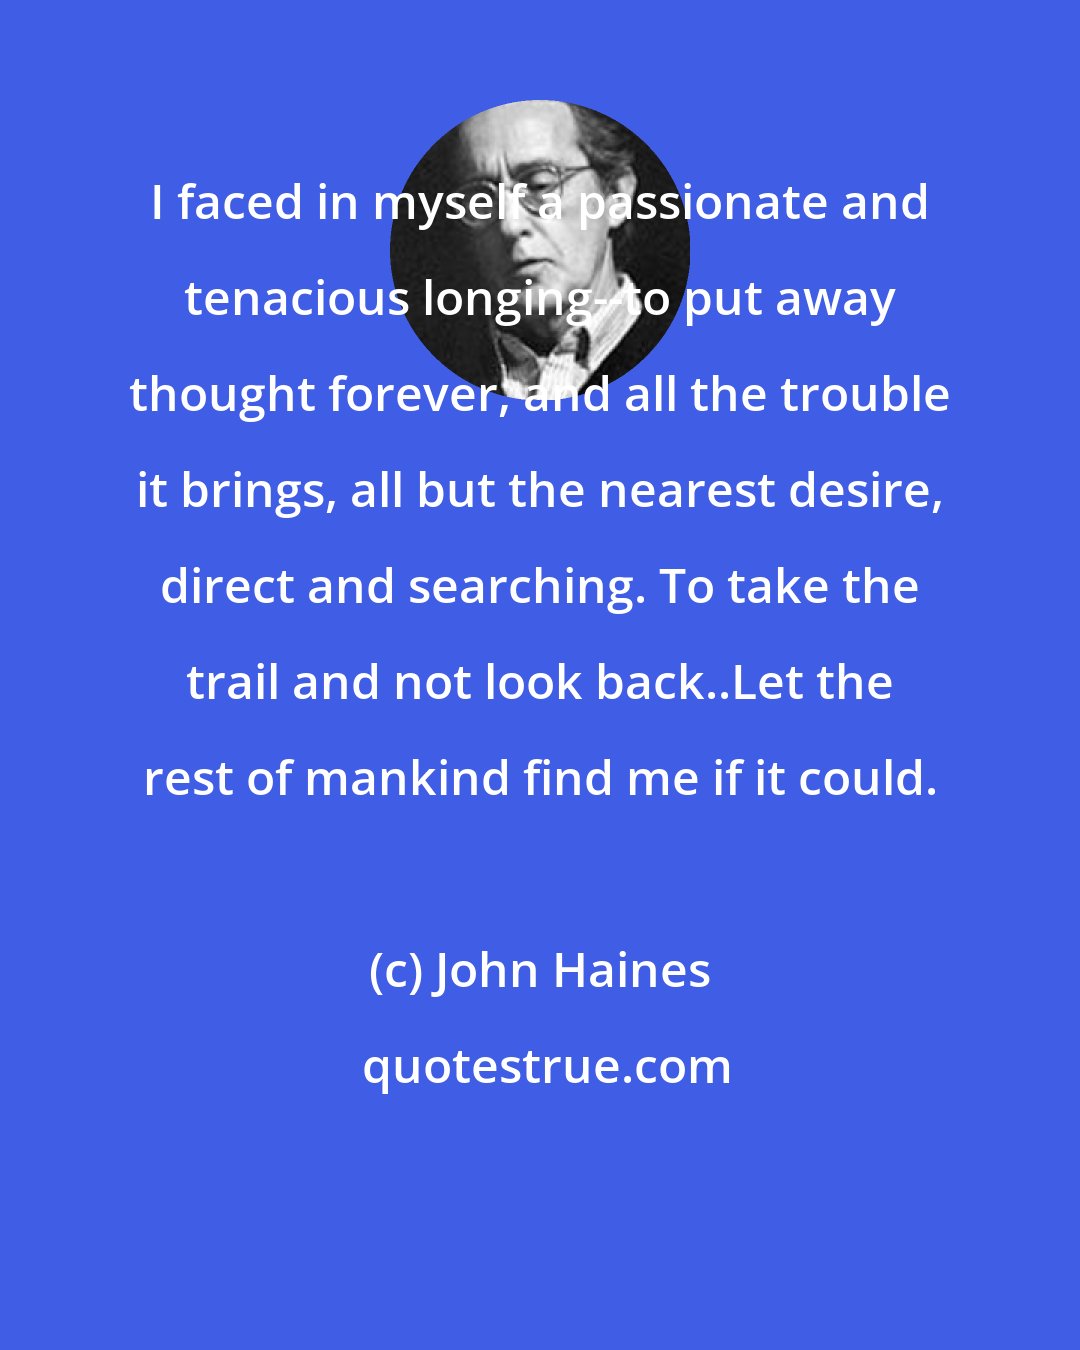 John Haines: I faced in myself a passionate and tenacious longing--to put away thought forever, and all the trouble it brings, all but the nearest desire, direct and searching. To take the trail and not look back..Let the rest of mankind find me if it could.